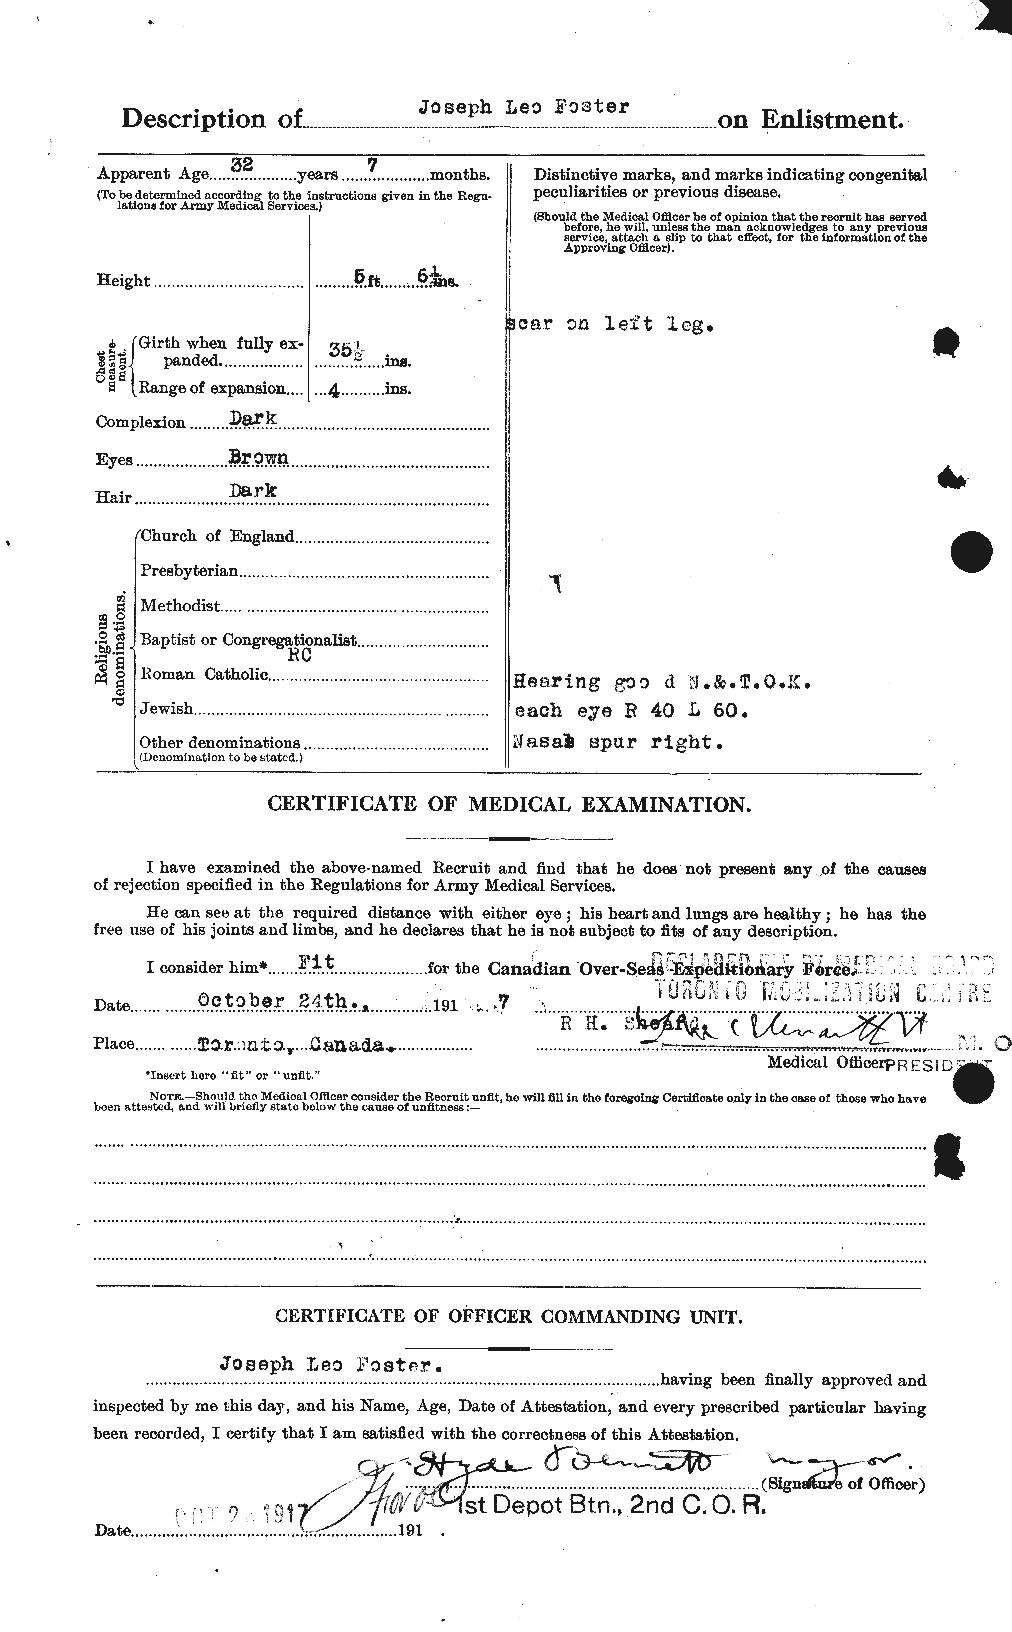 Personnel Records of the First World War - CEF 333390b